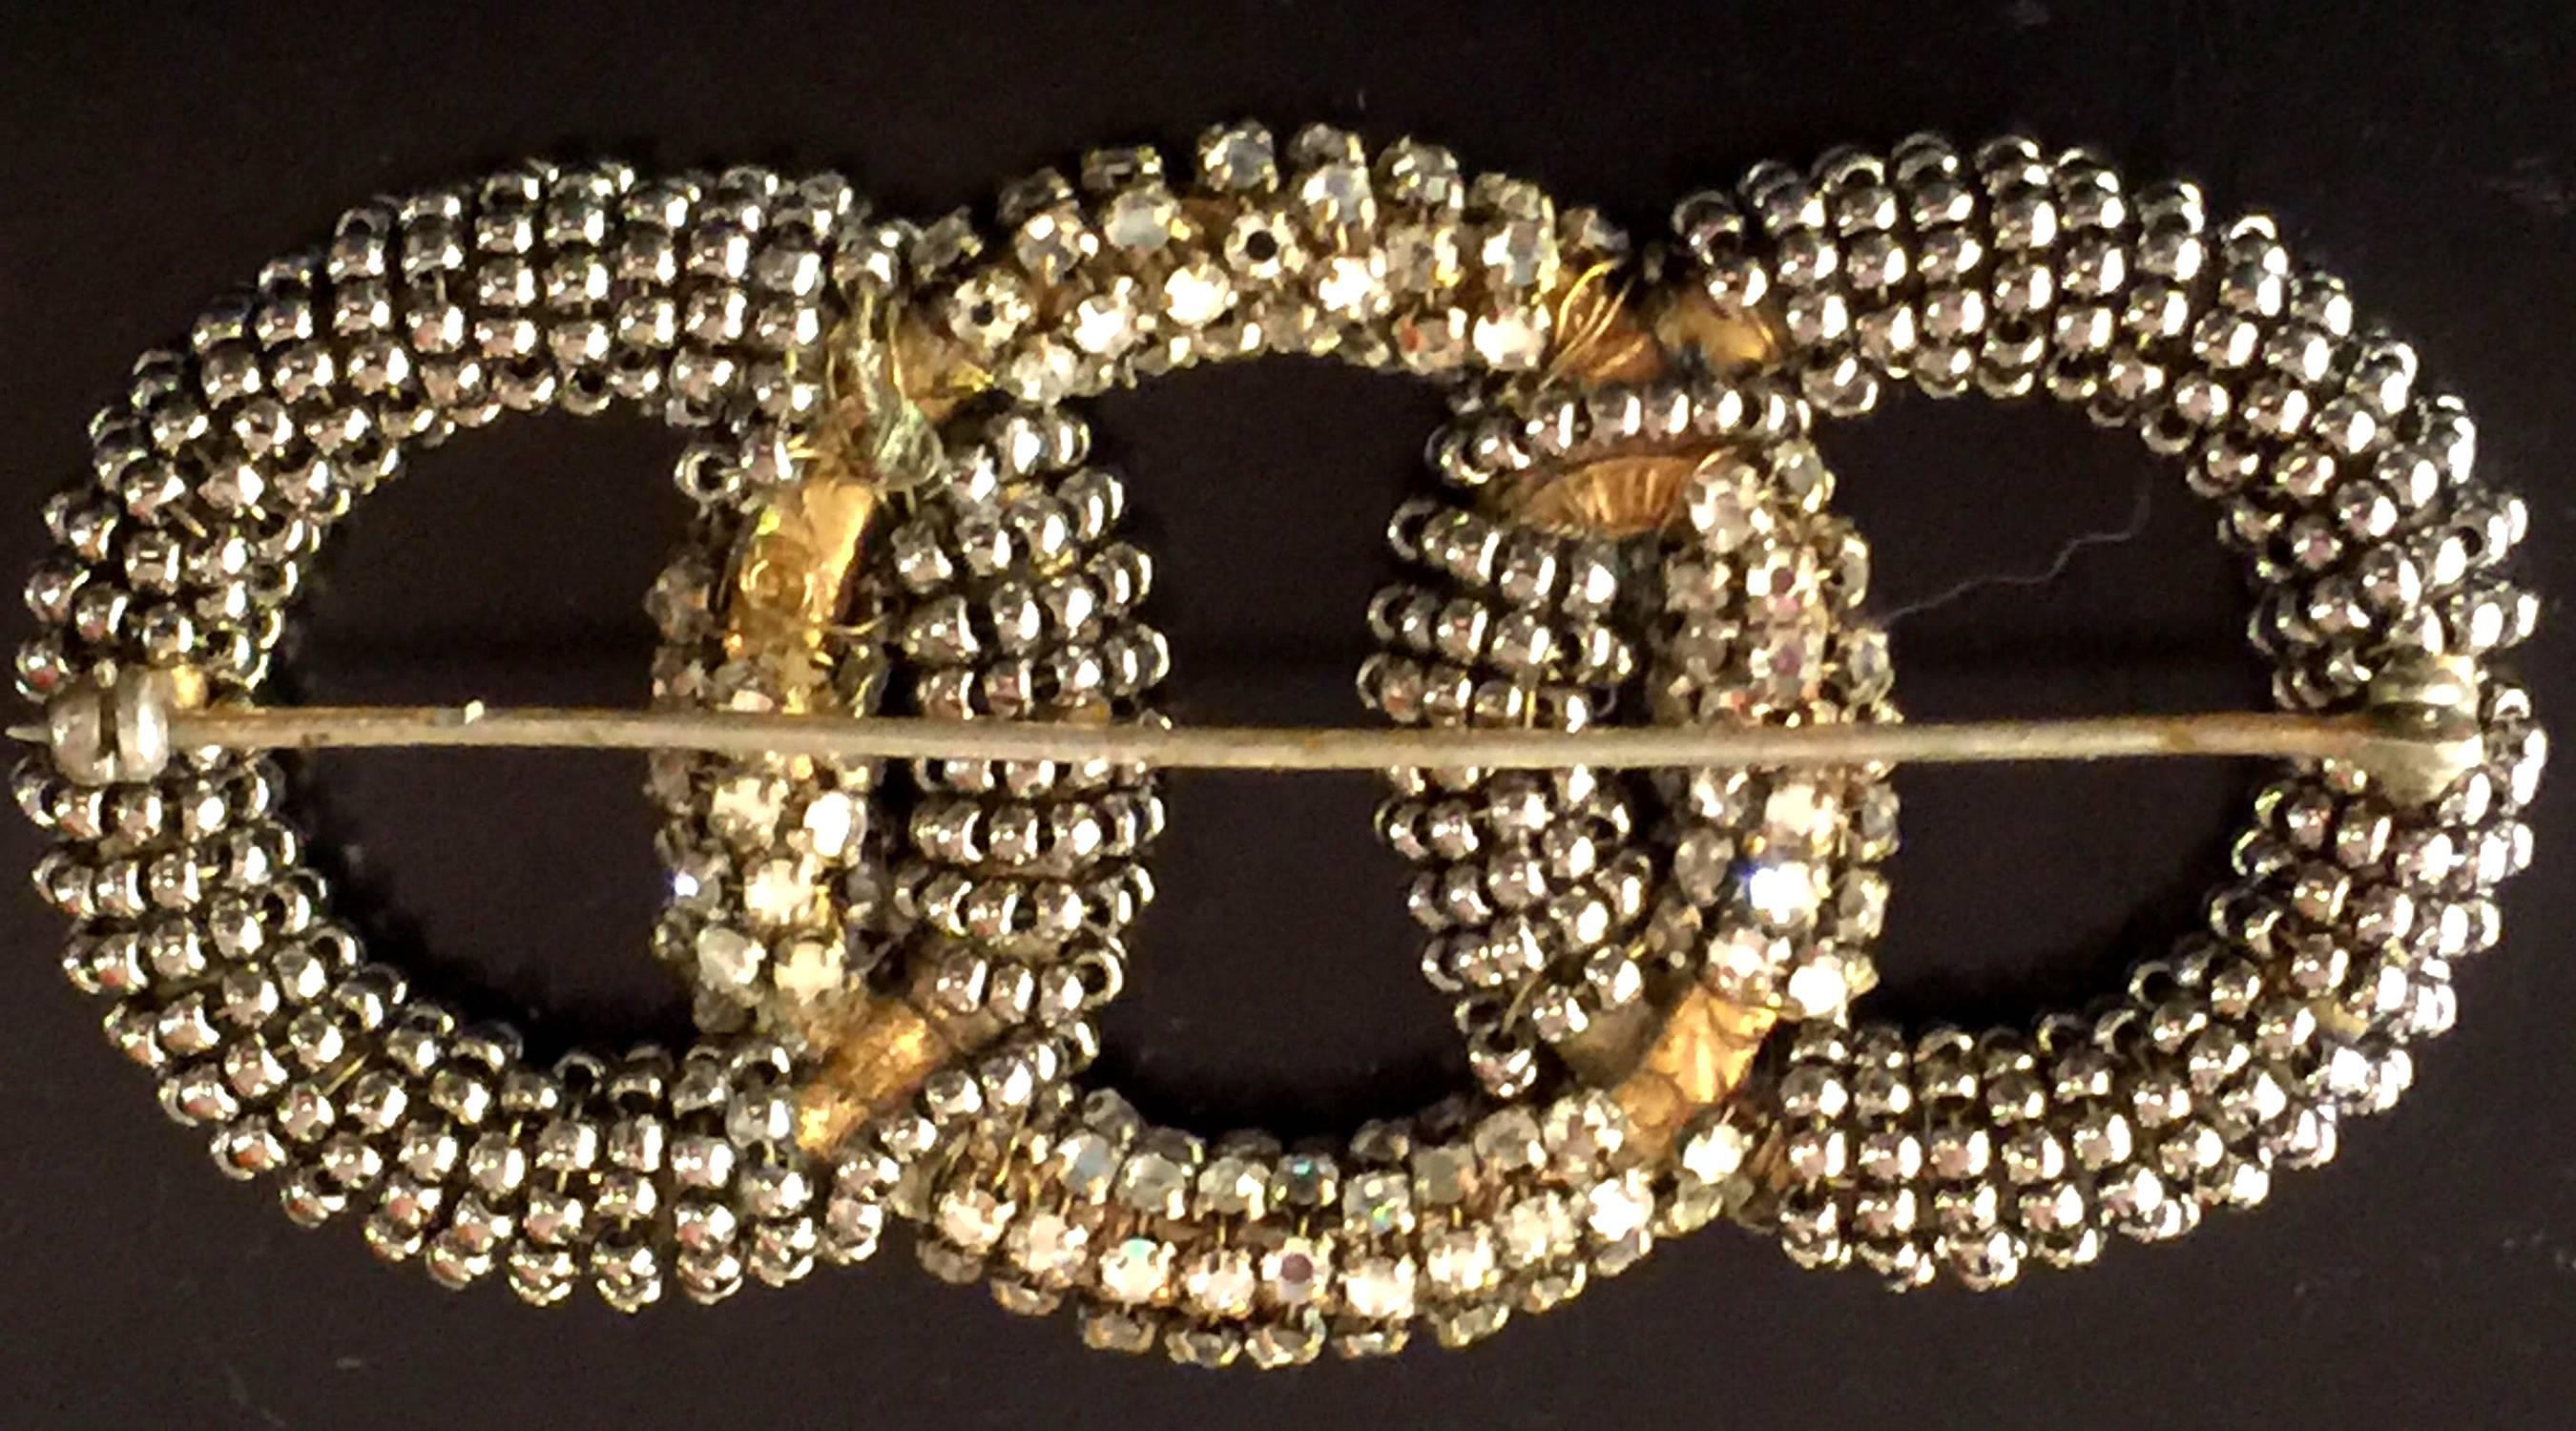 Intricate, yet elegant, this three interlocking circles pin by Miriam Haskell has both seed pearls and montee rhinestone detail in this tailored beauty of understated elegance. Approximately 3" long by 1" high this brooch has its original